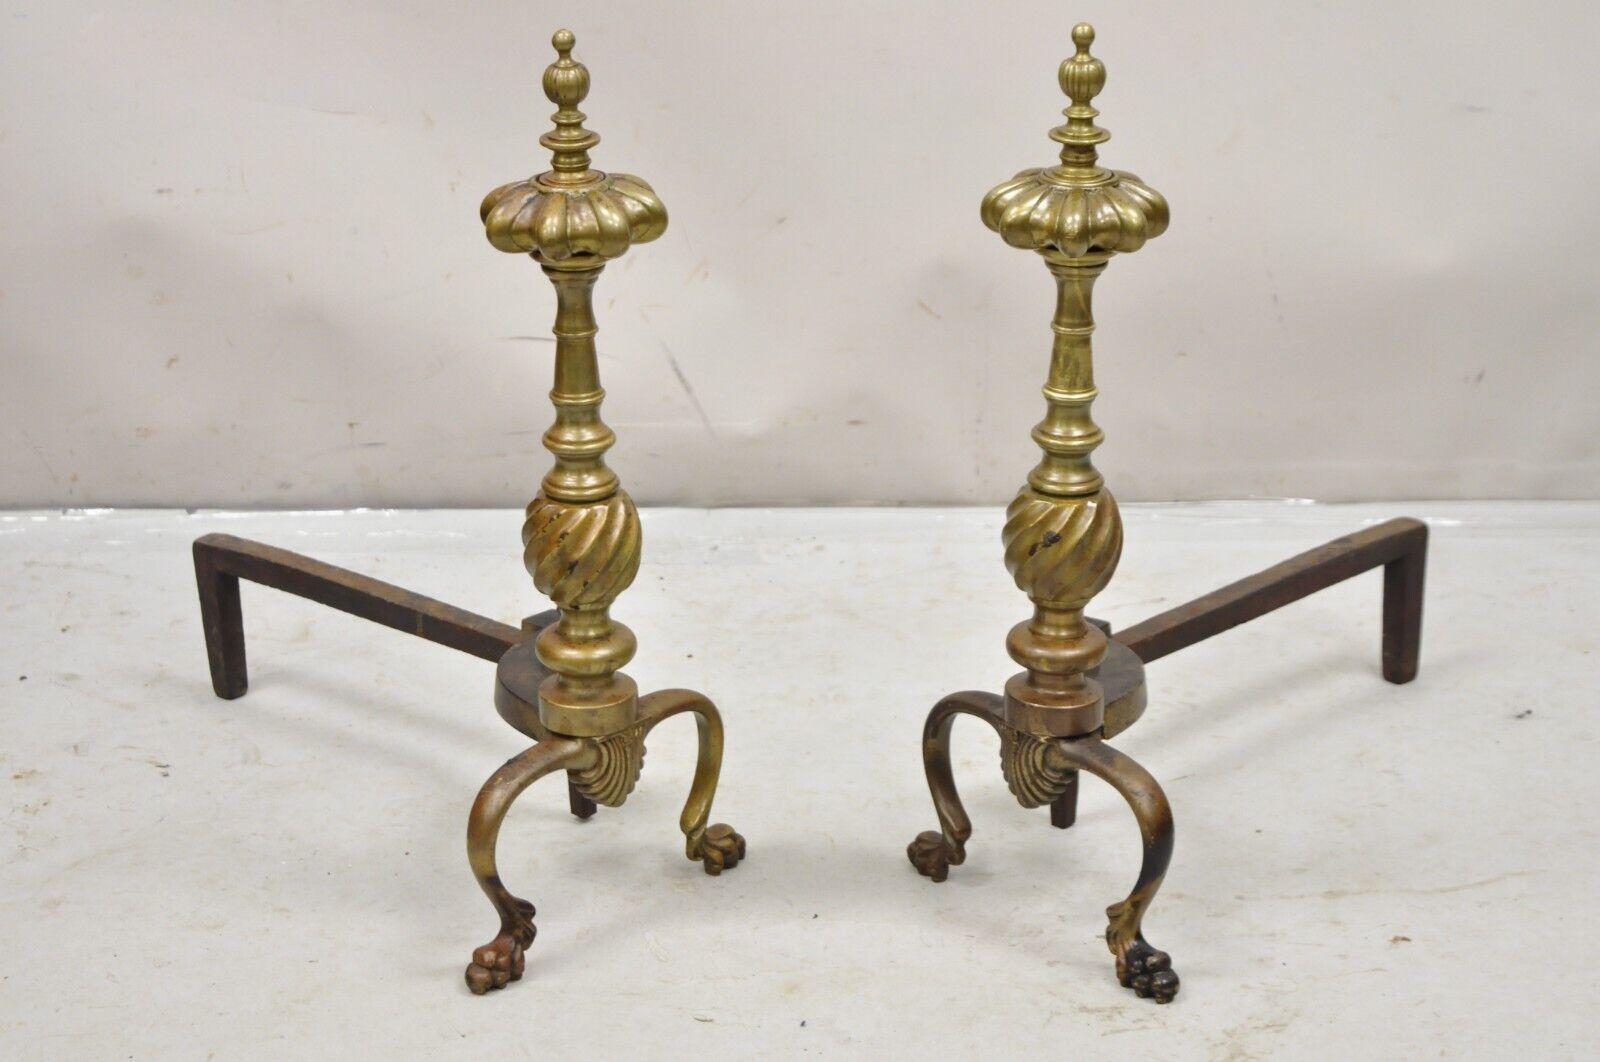 Antique French Empire Style Bronze Brass Spiral Column Andirons- a Pair. Circa 1900. Measurements: 20